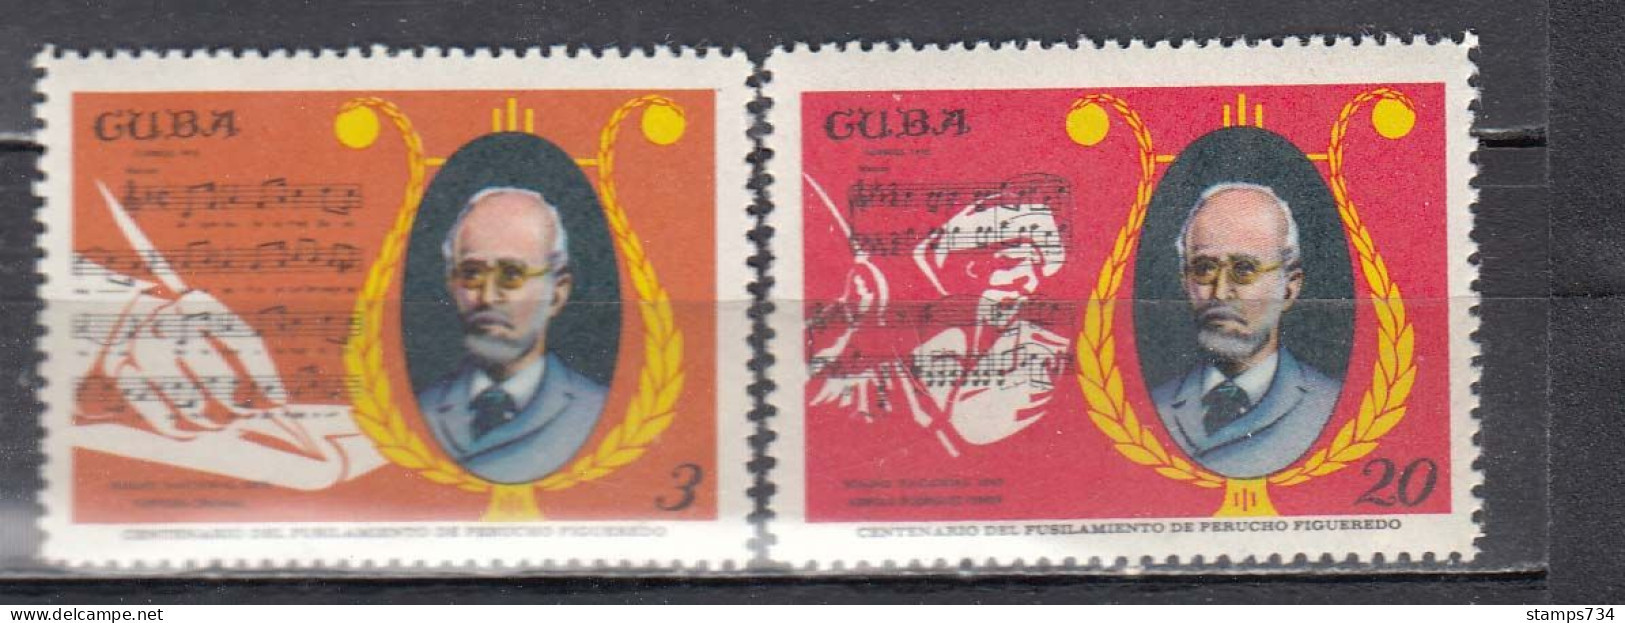 Cuba 1970 - 100th Anniversary Of The Death Of Perucho Figueredo, Mi-Nr. 1616/17, MNH** - Unused Stamps